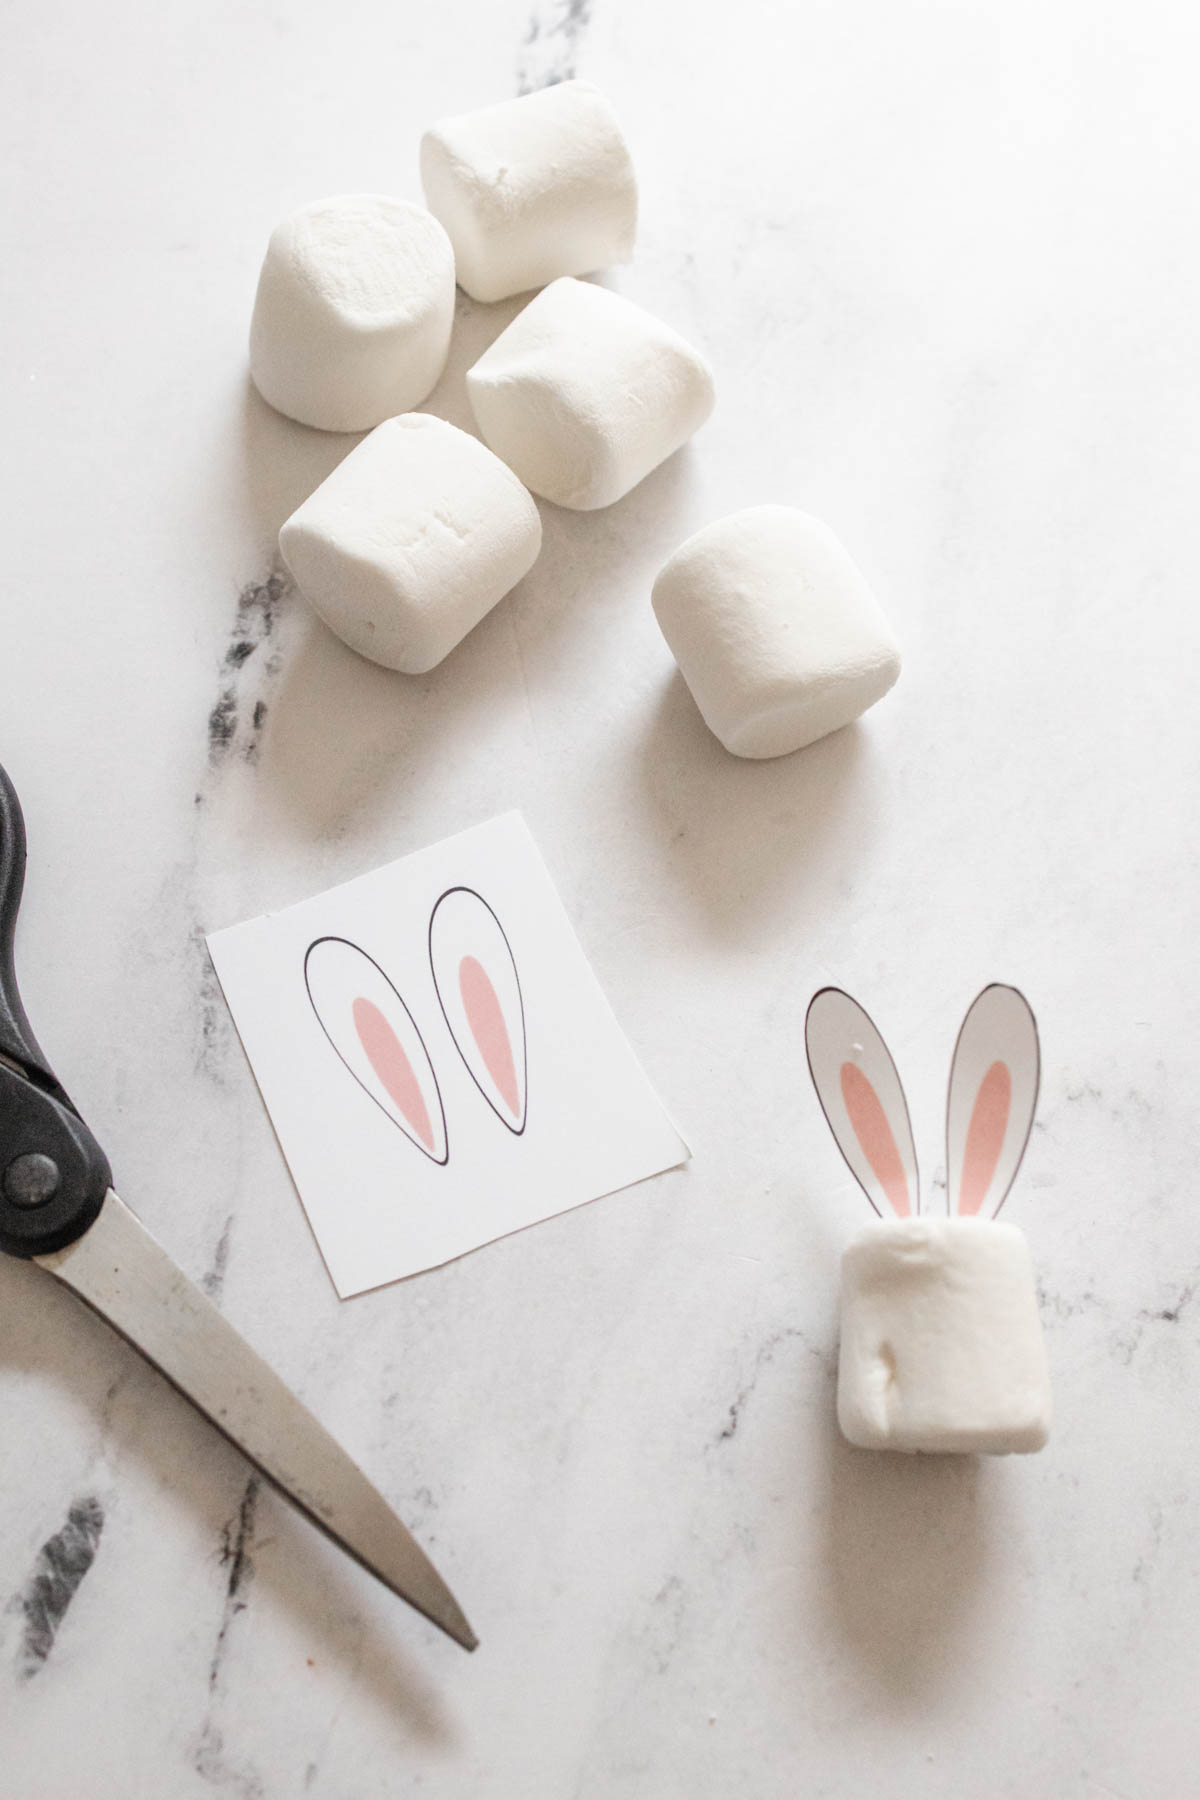 Marshmallows and printable bunny ears for a drink garnish for Easter drinks.